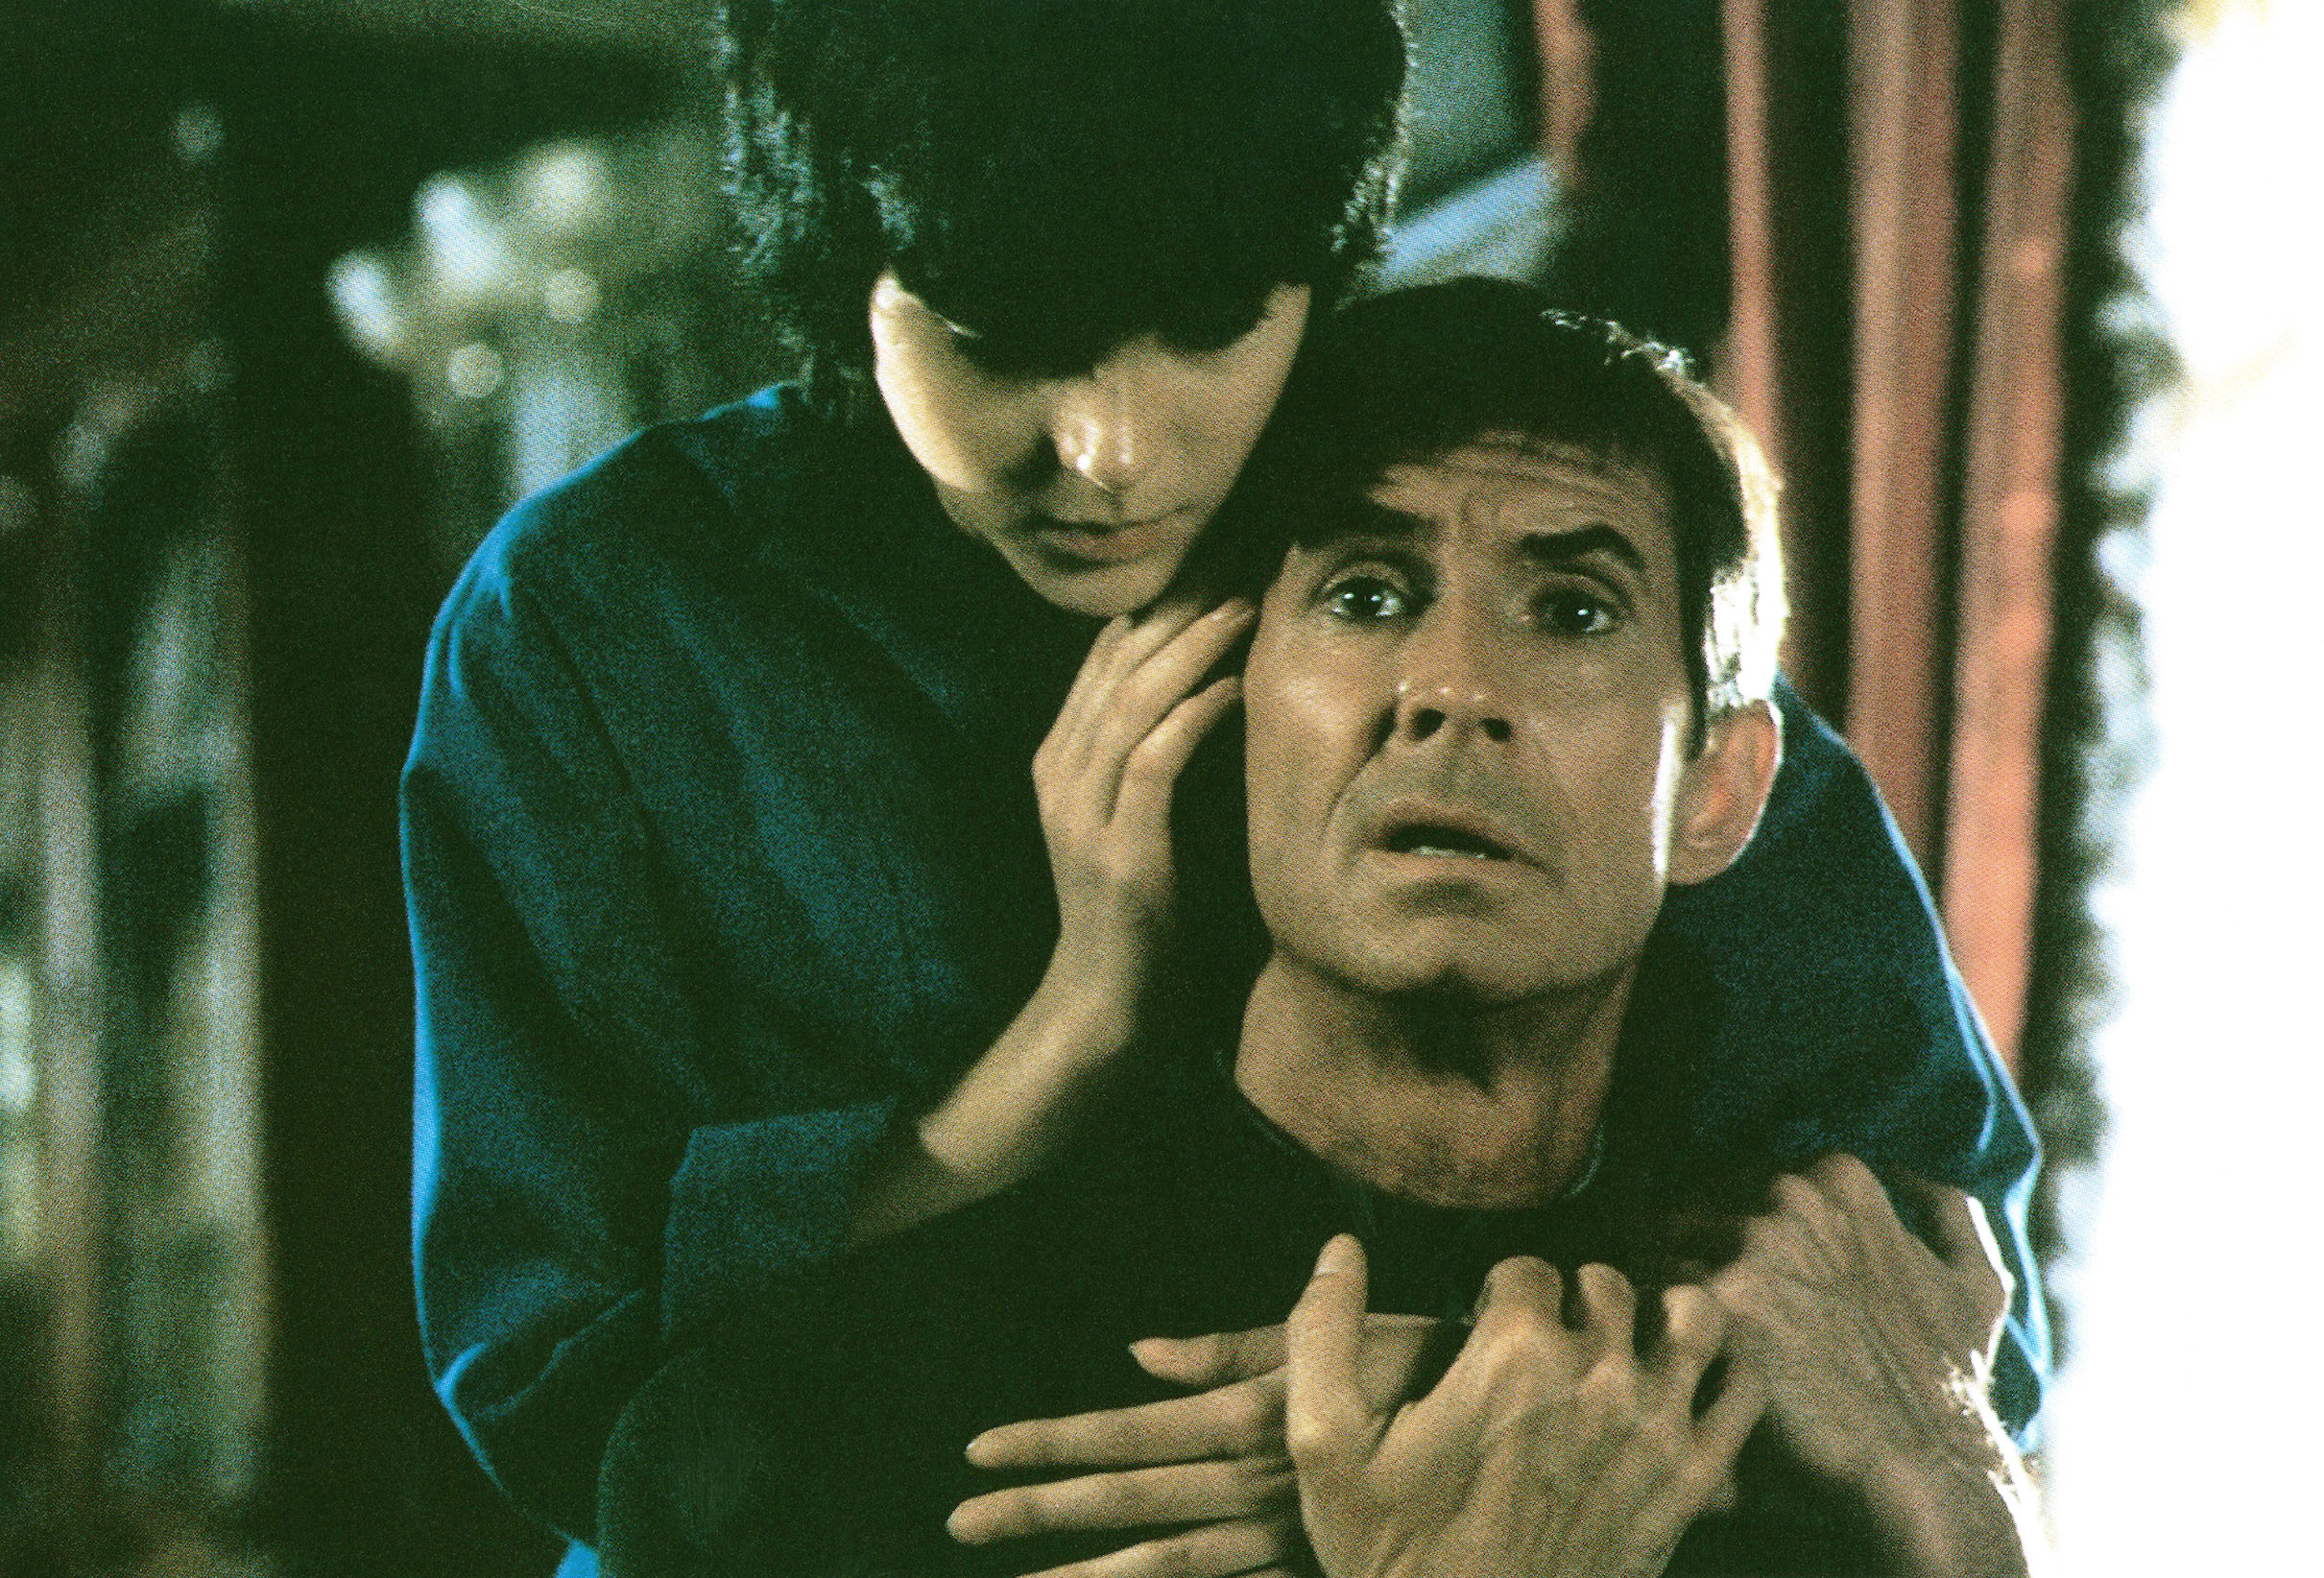 Anthony Perkins attempts to find solace in the embrace of Meg Tilly in &quot;Psycho II&quot;